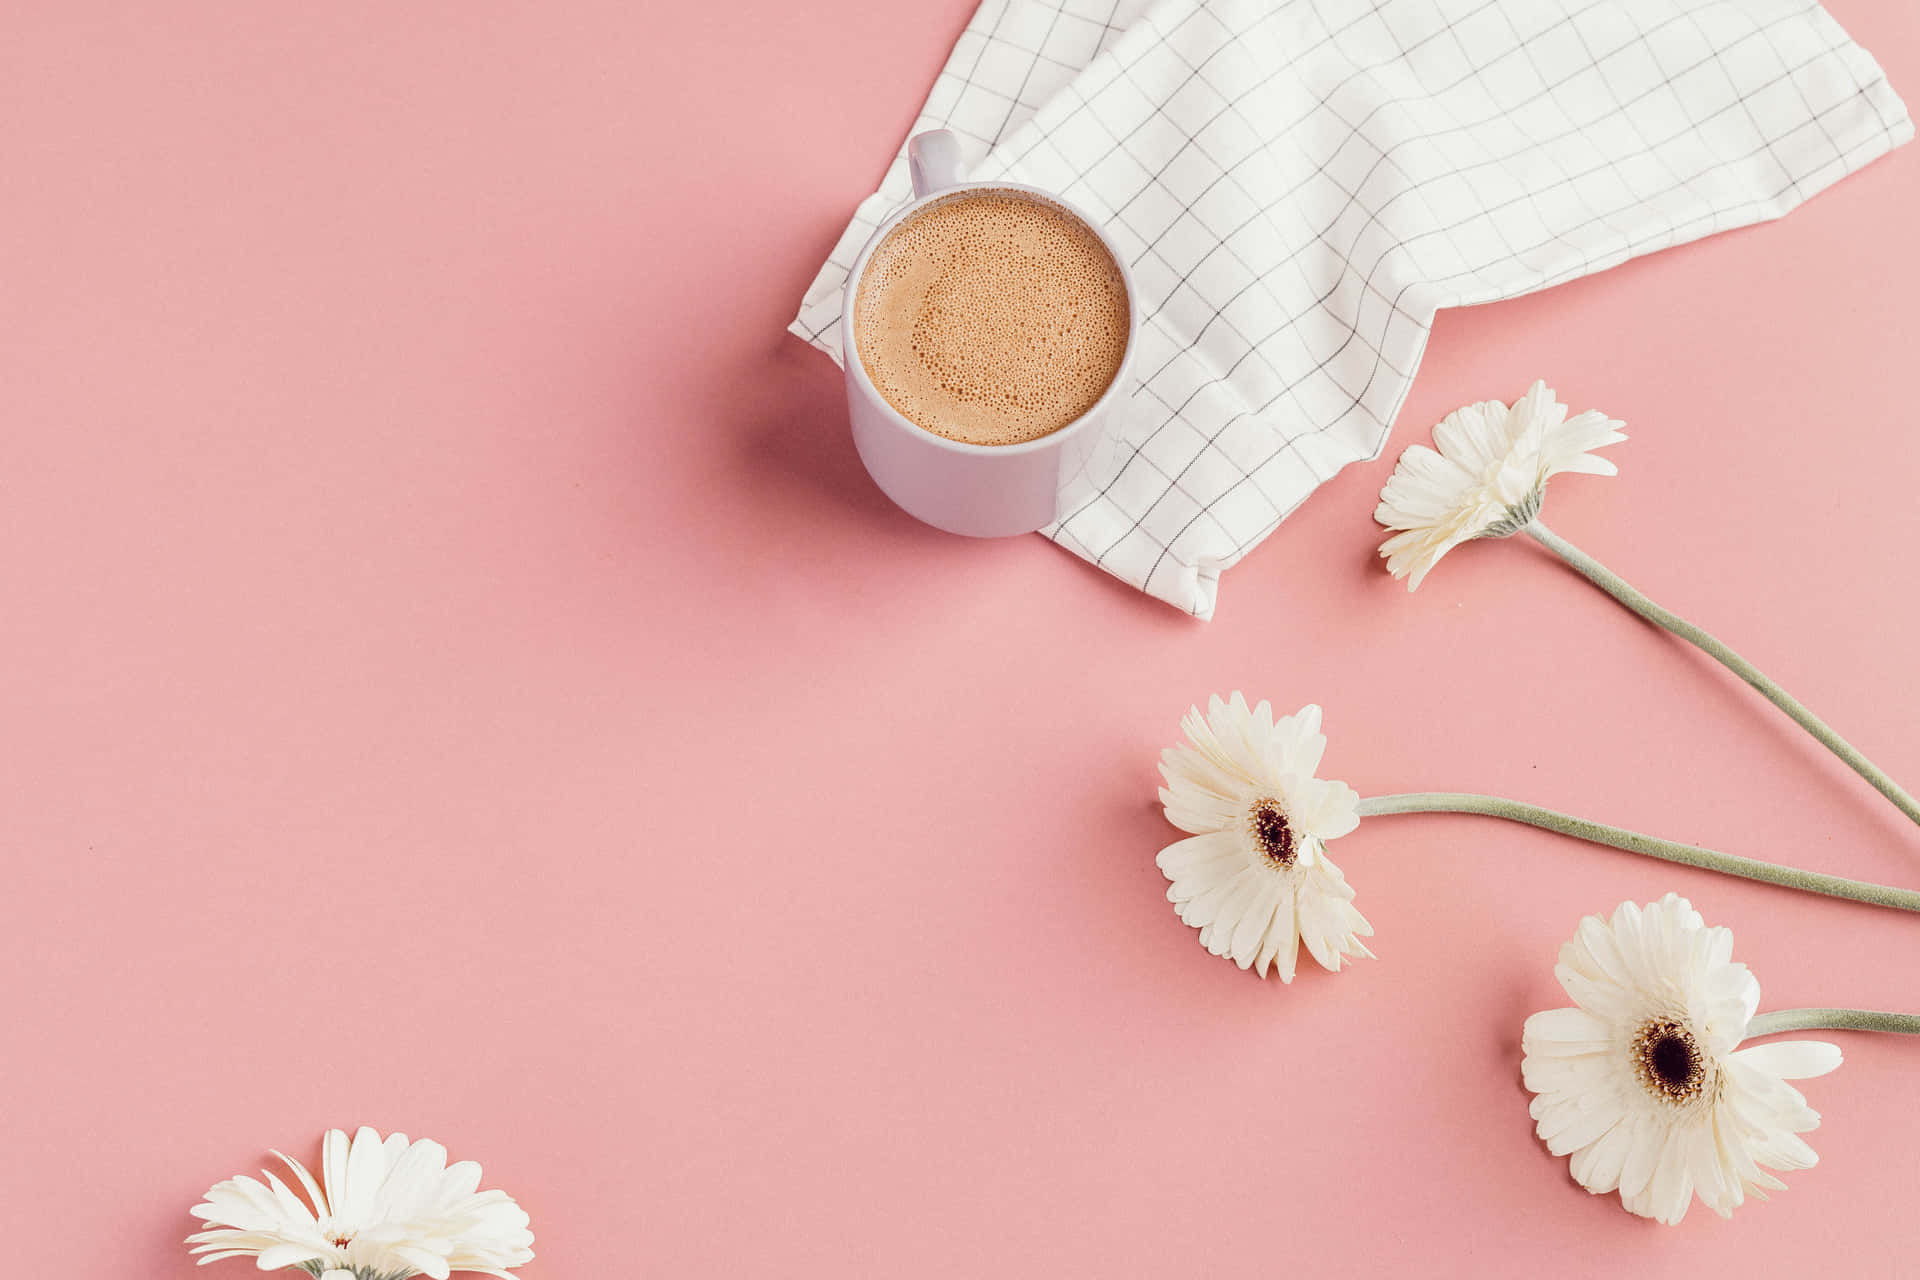 Coffee, Table Napkin And Flower Desktop Pink Aesthetic Wallpaper